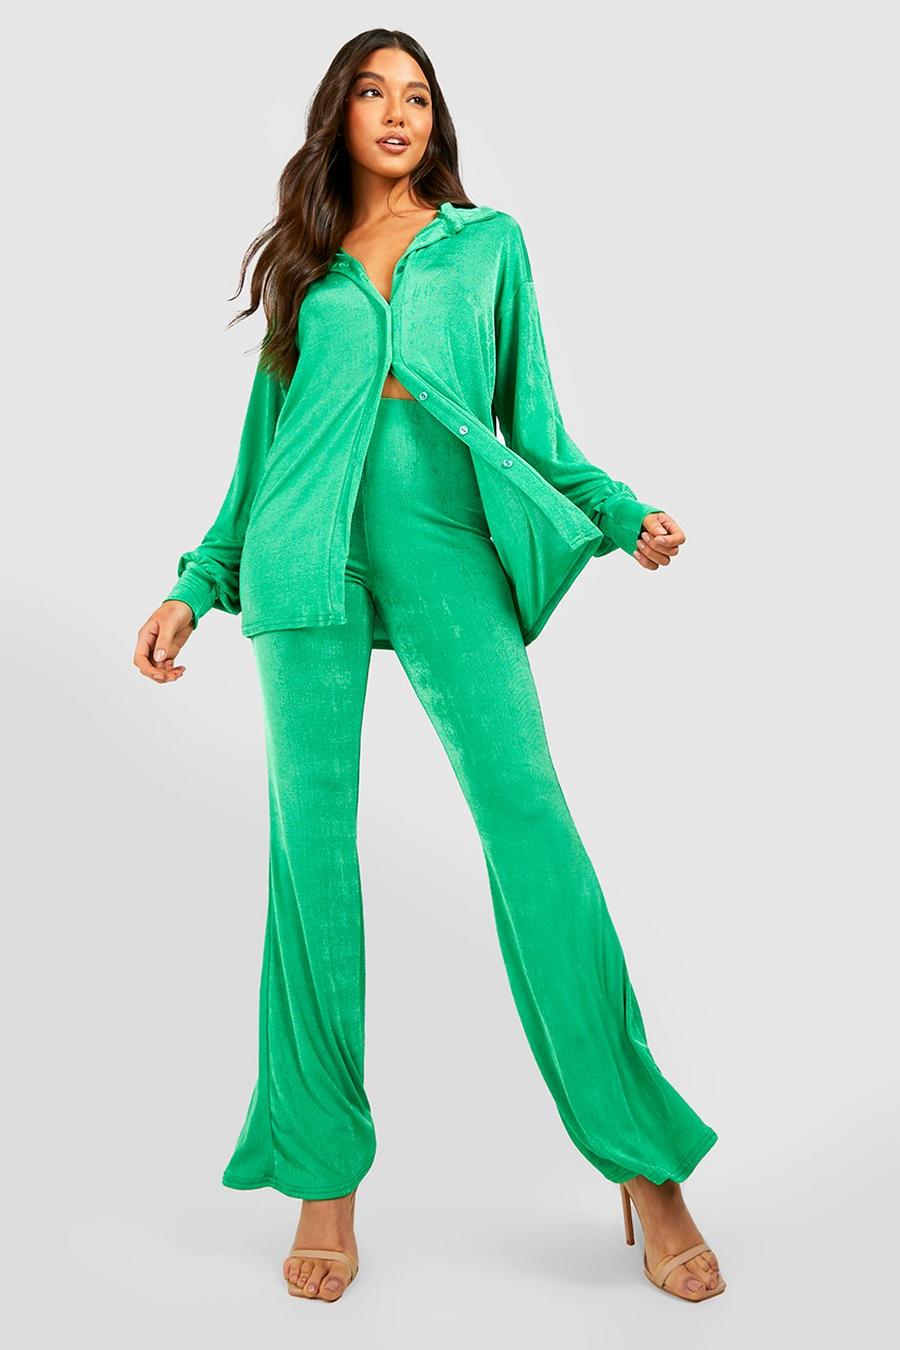 Bright green gerde Acetate Slinky Relaxed Fit Shirt & Flare